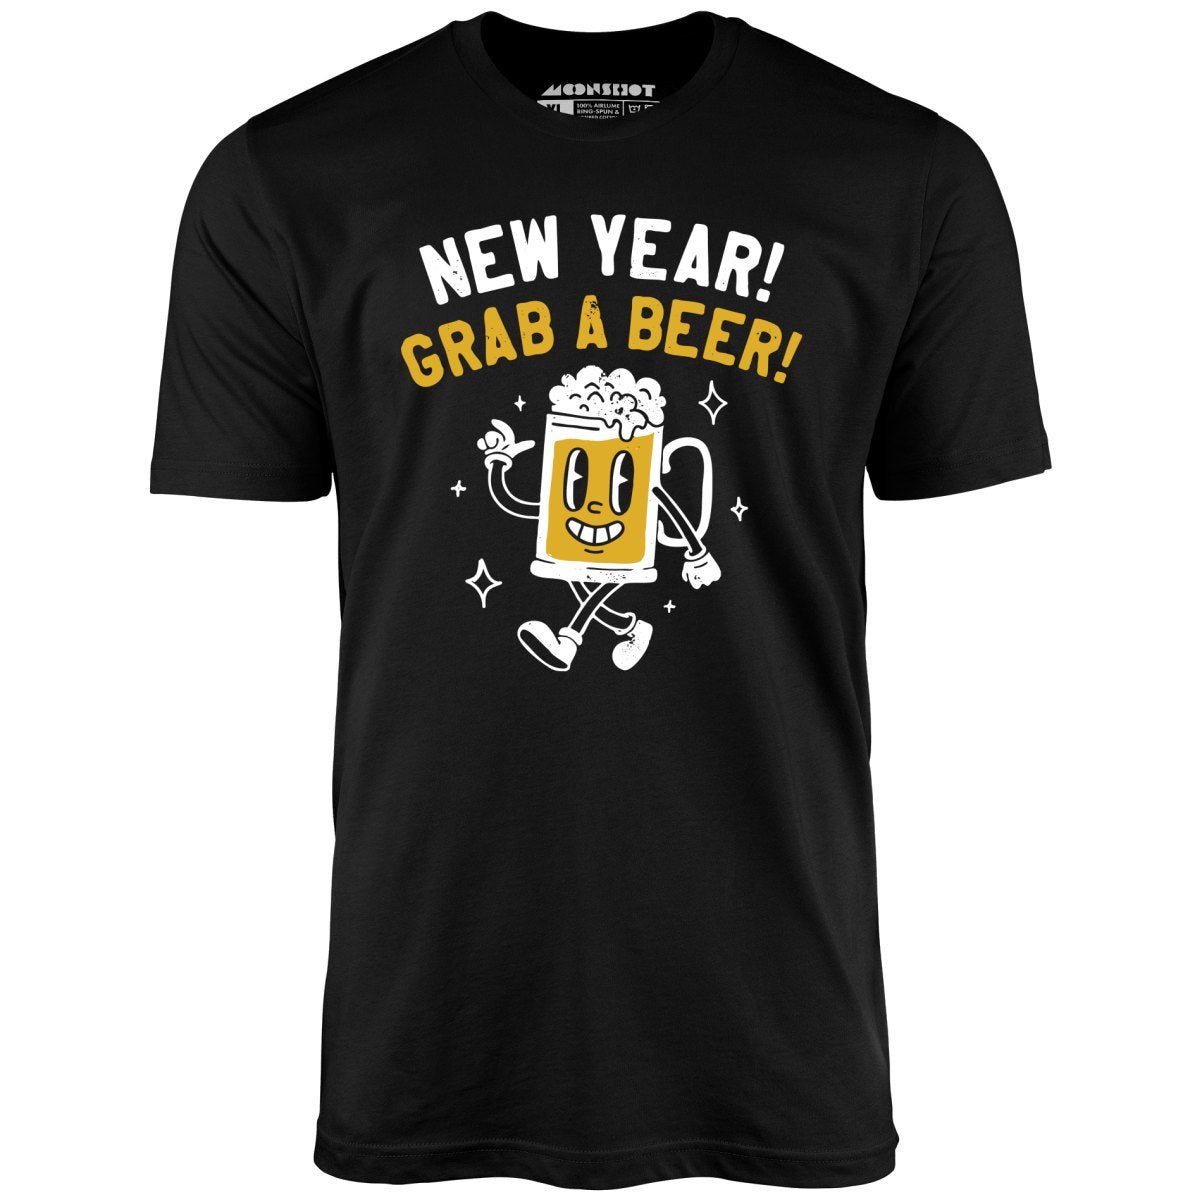 New Year Grab a Beer - Unisex T-Shirt